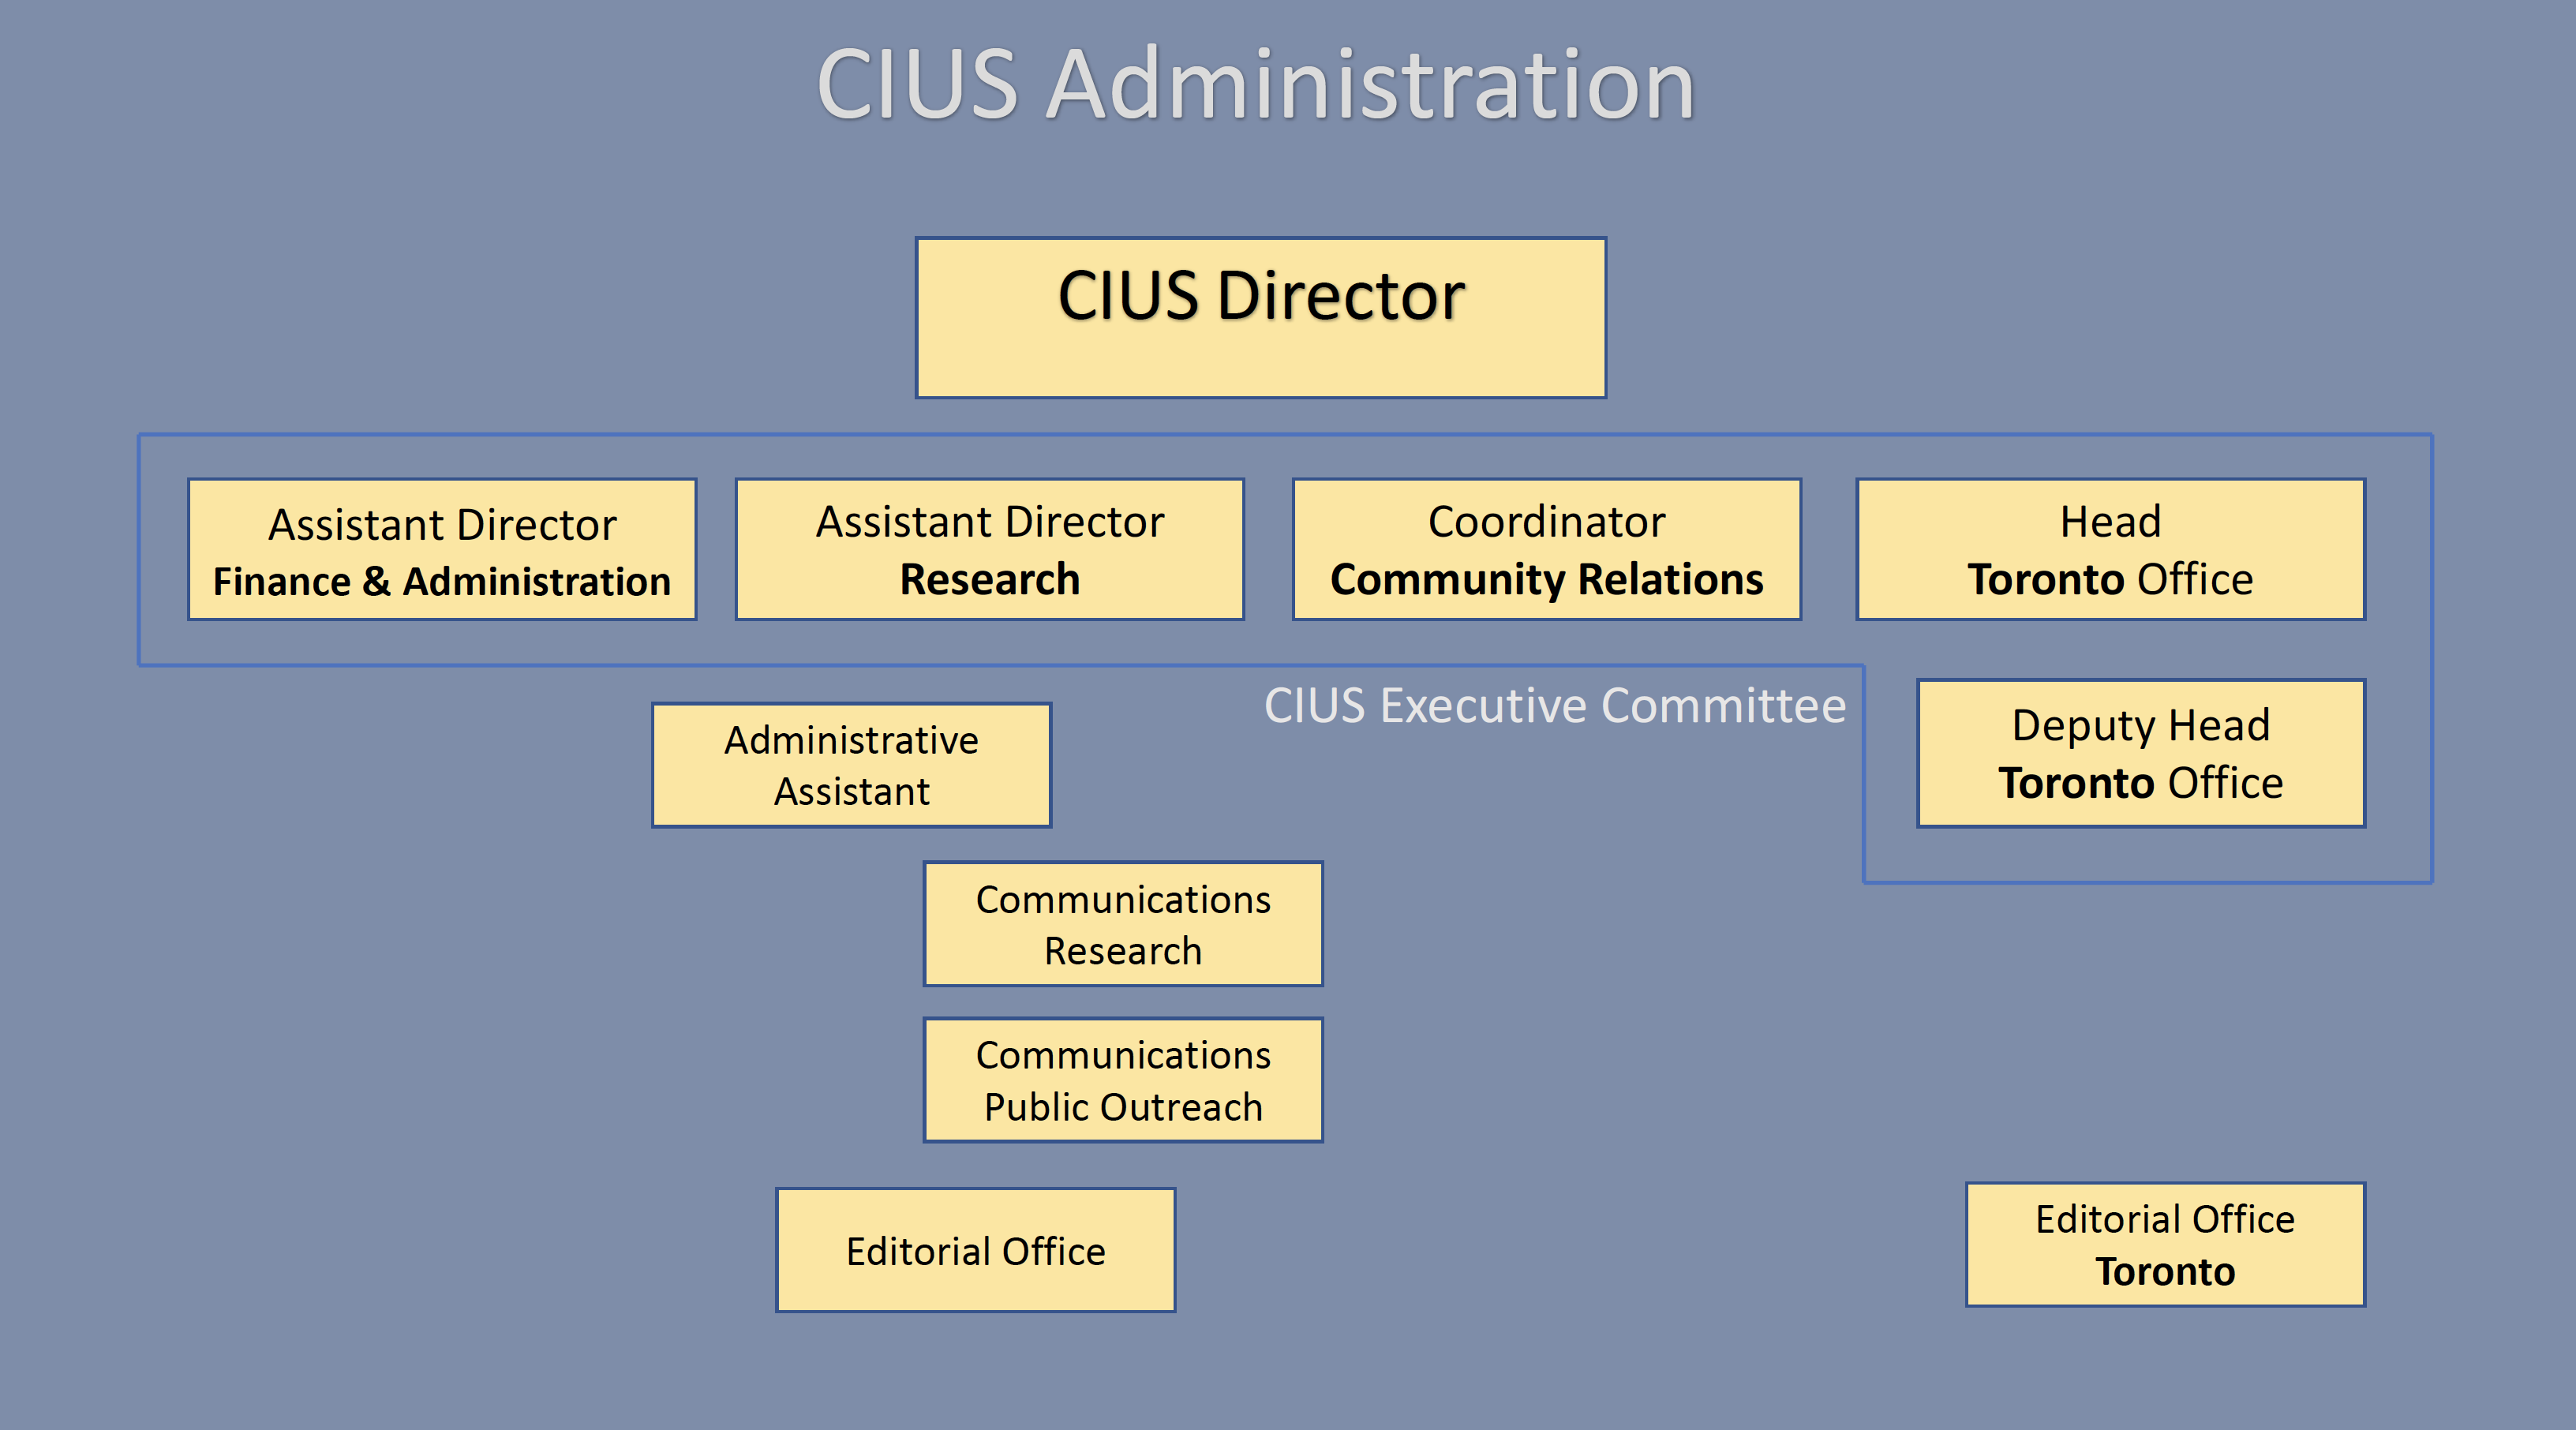 cius-administration-202021.png